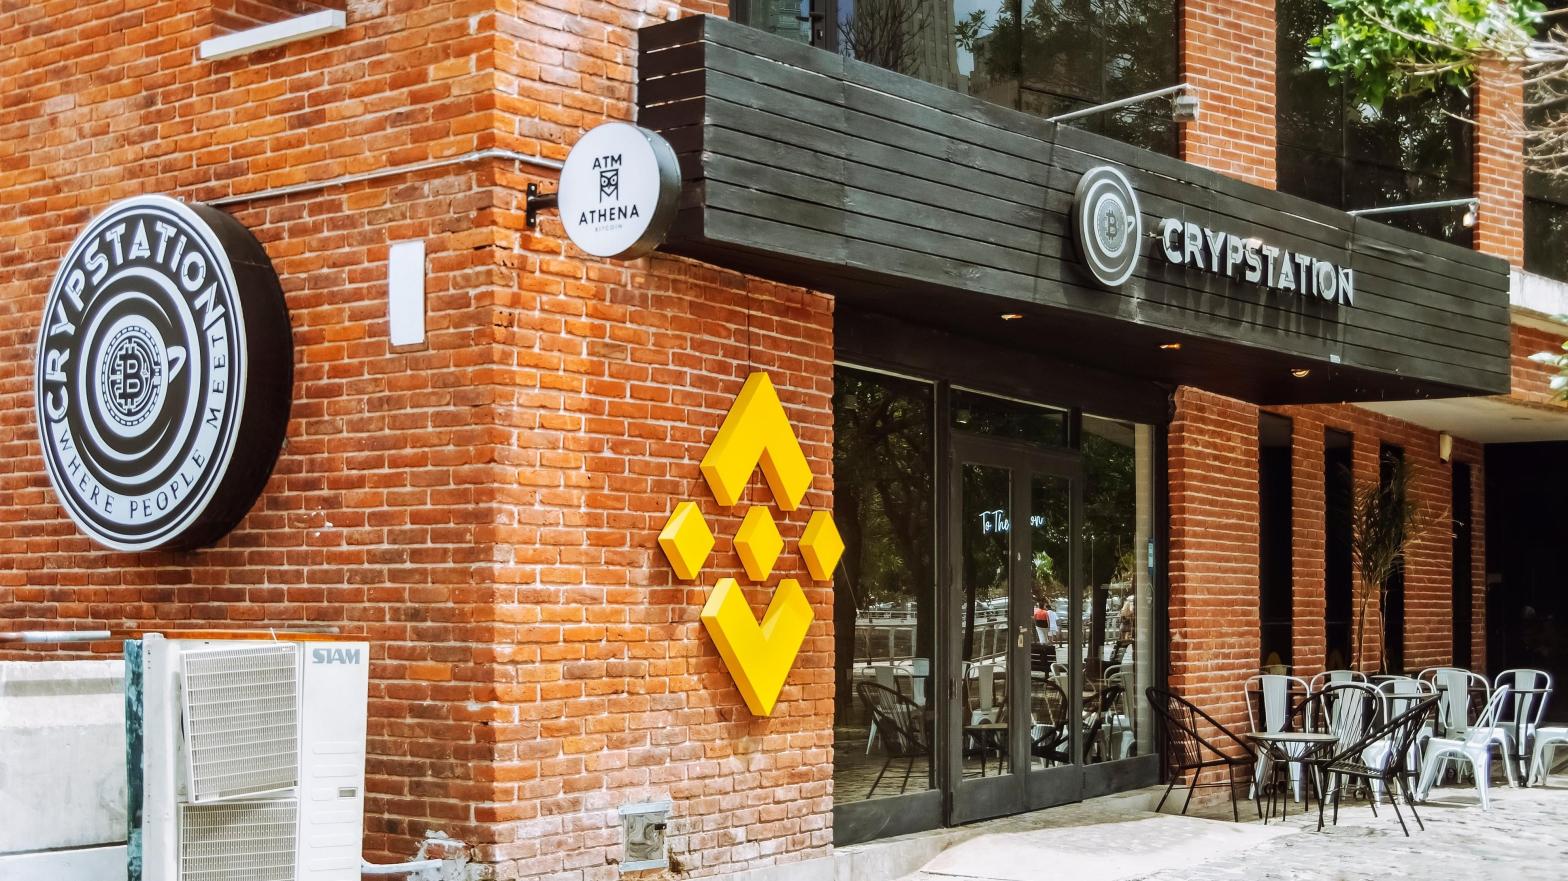 Binance does not have any listed headquarters or set country, a point of contention between the crypto exchange and regulators. (Photo: ad-foto, Shutterstock)